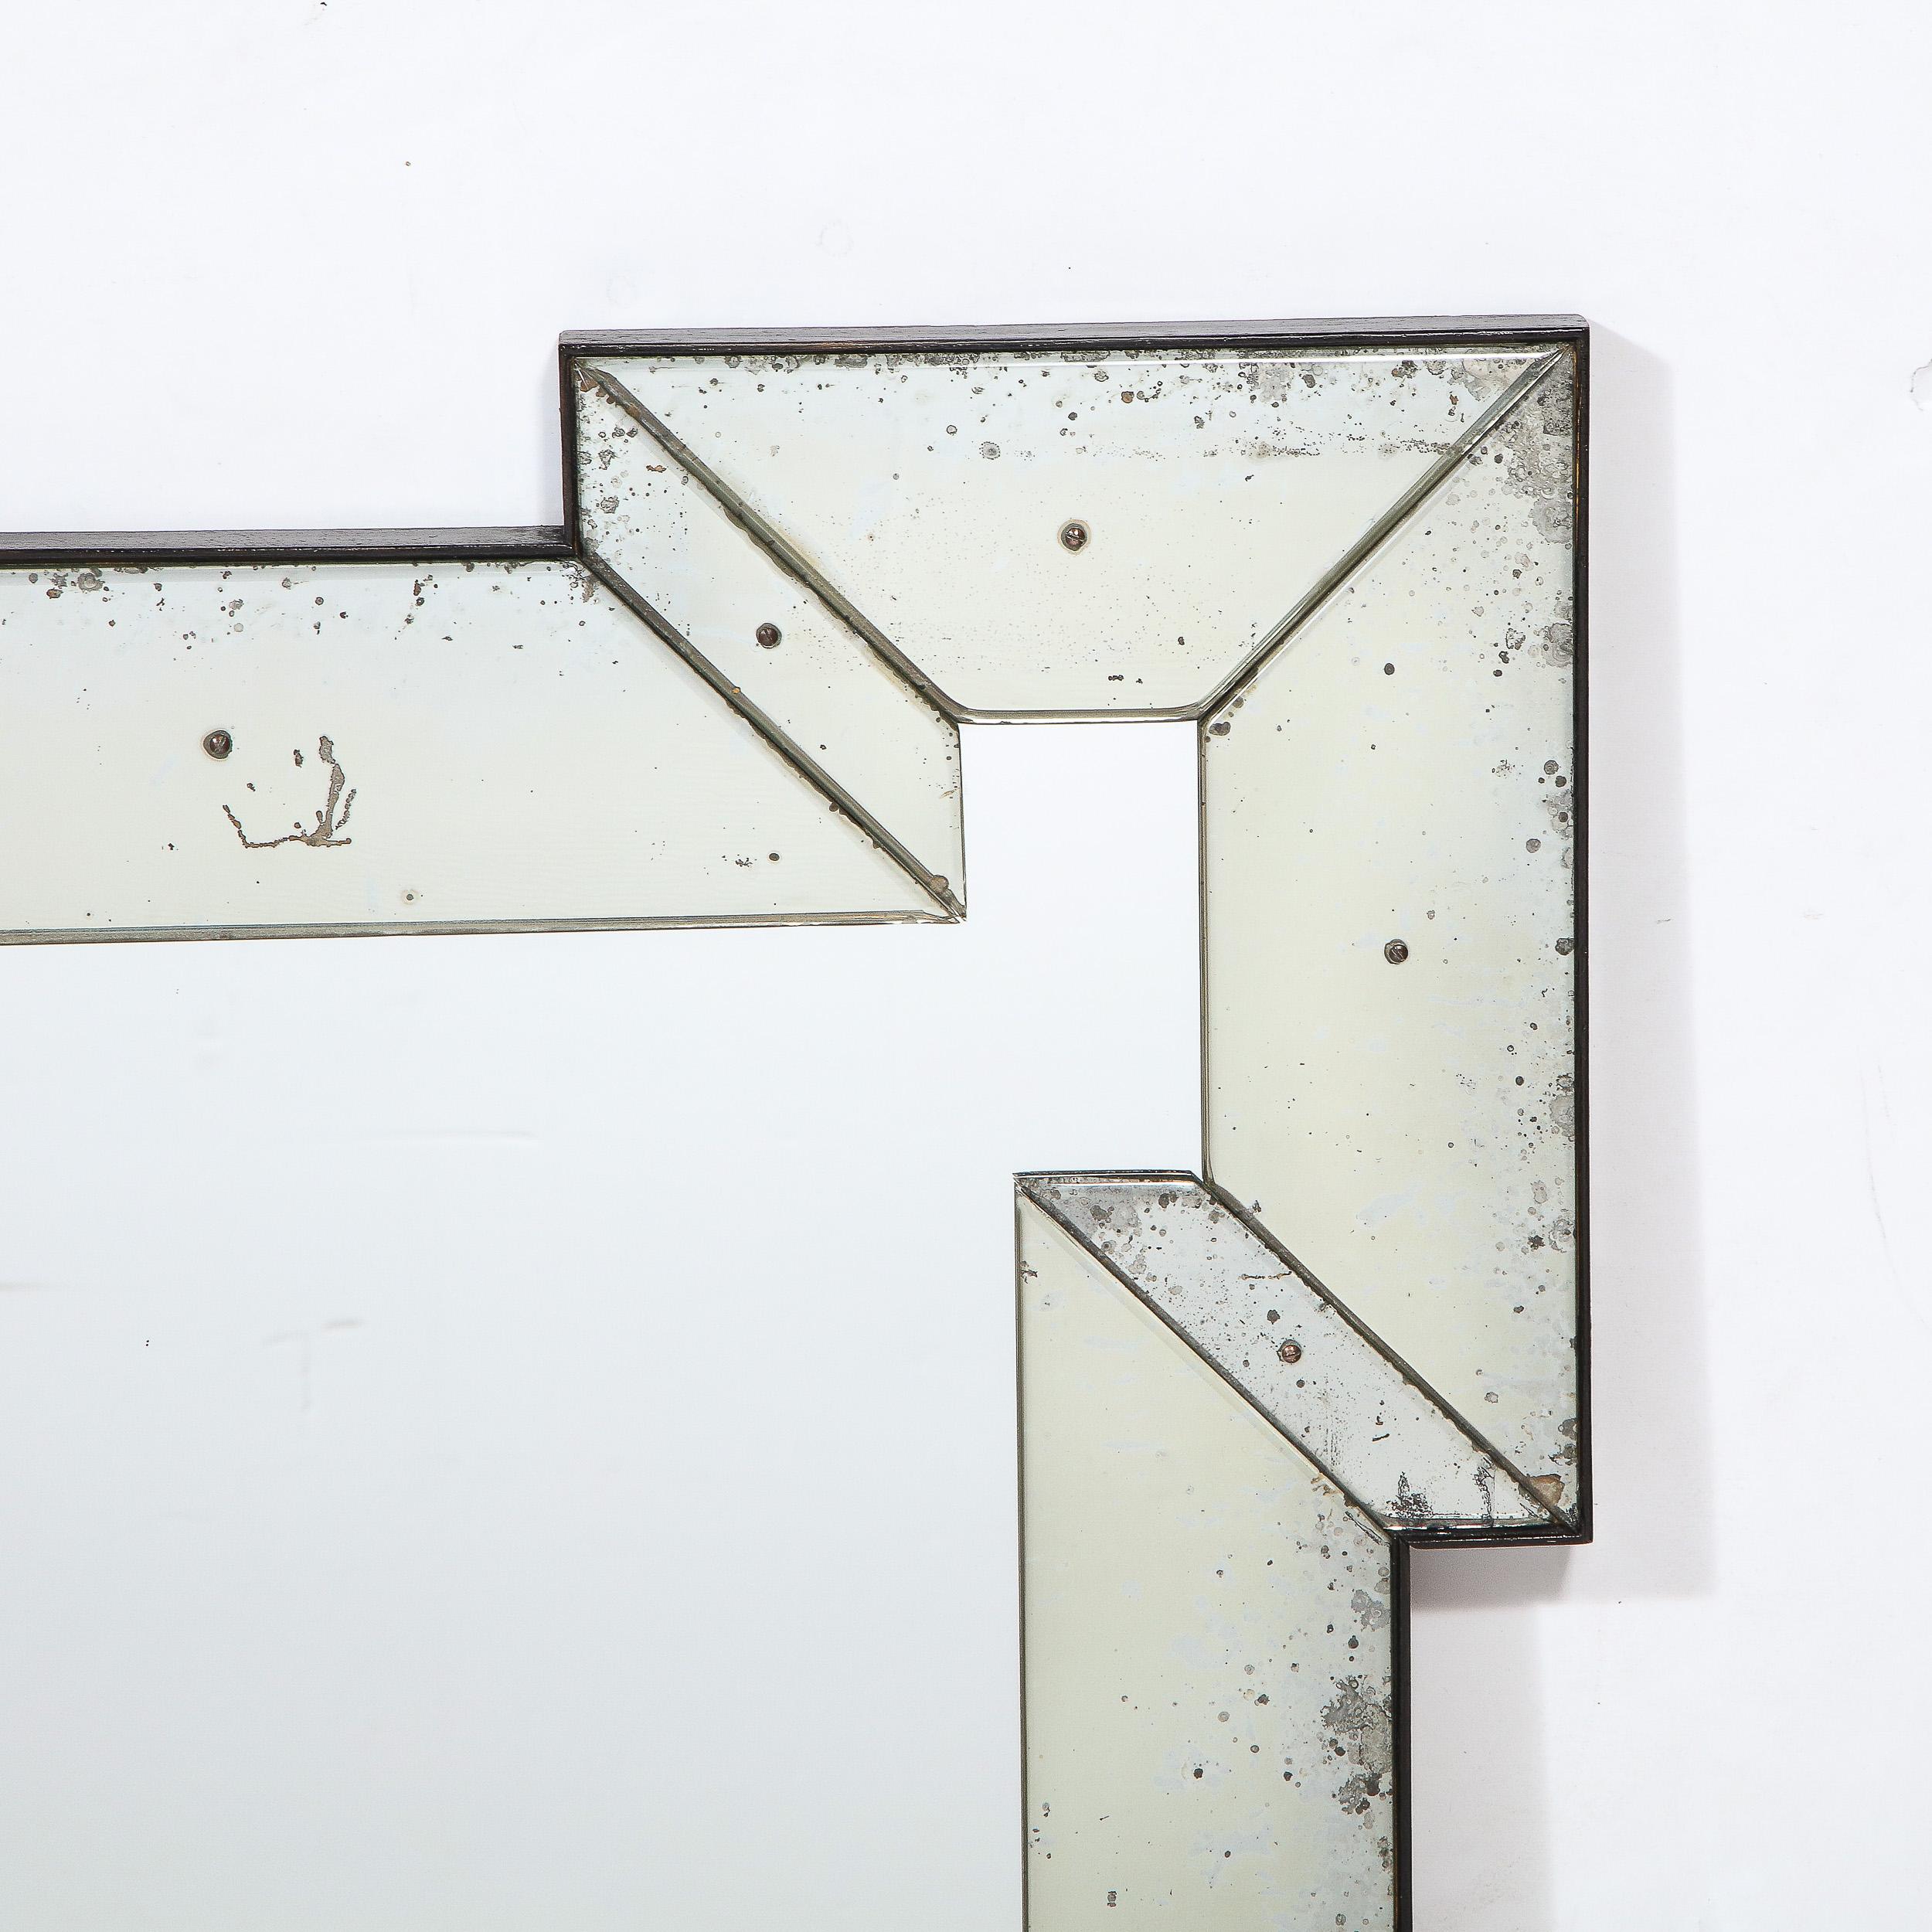 This graphic and sophisticated Mid Century Modern mirror was realized in the United States circa 1950. It features a rectangular geometric silhouette consisting of four sides with a cut-out rectangular form excised from the center of each outer